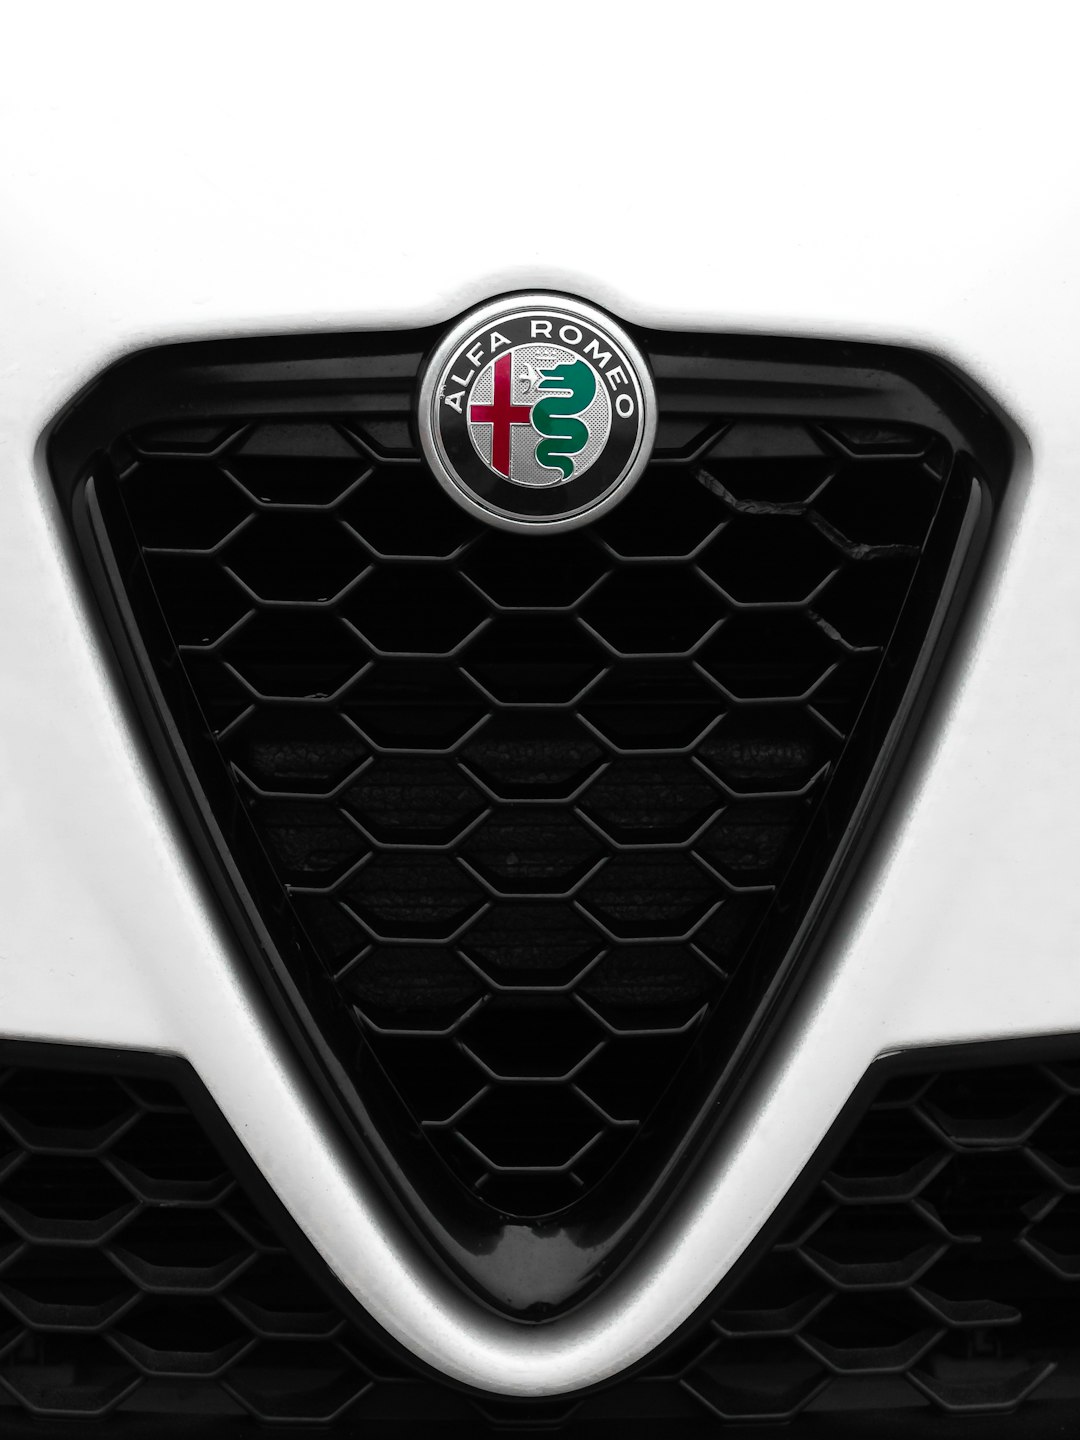 Alfa Romeo is an Italian luxury car manufacturer known for its sleek and stylish designs.